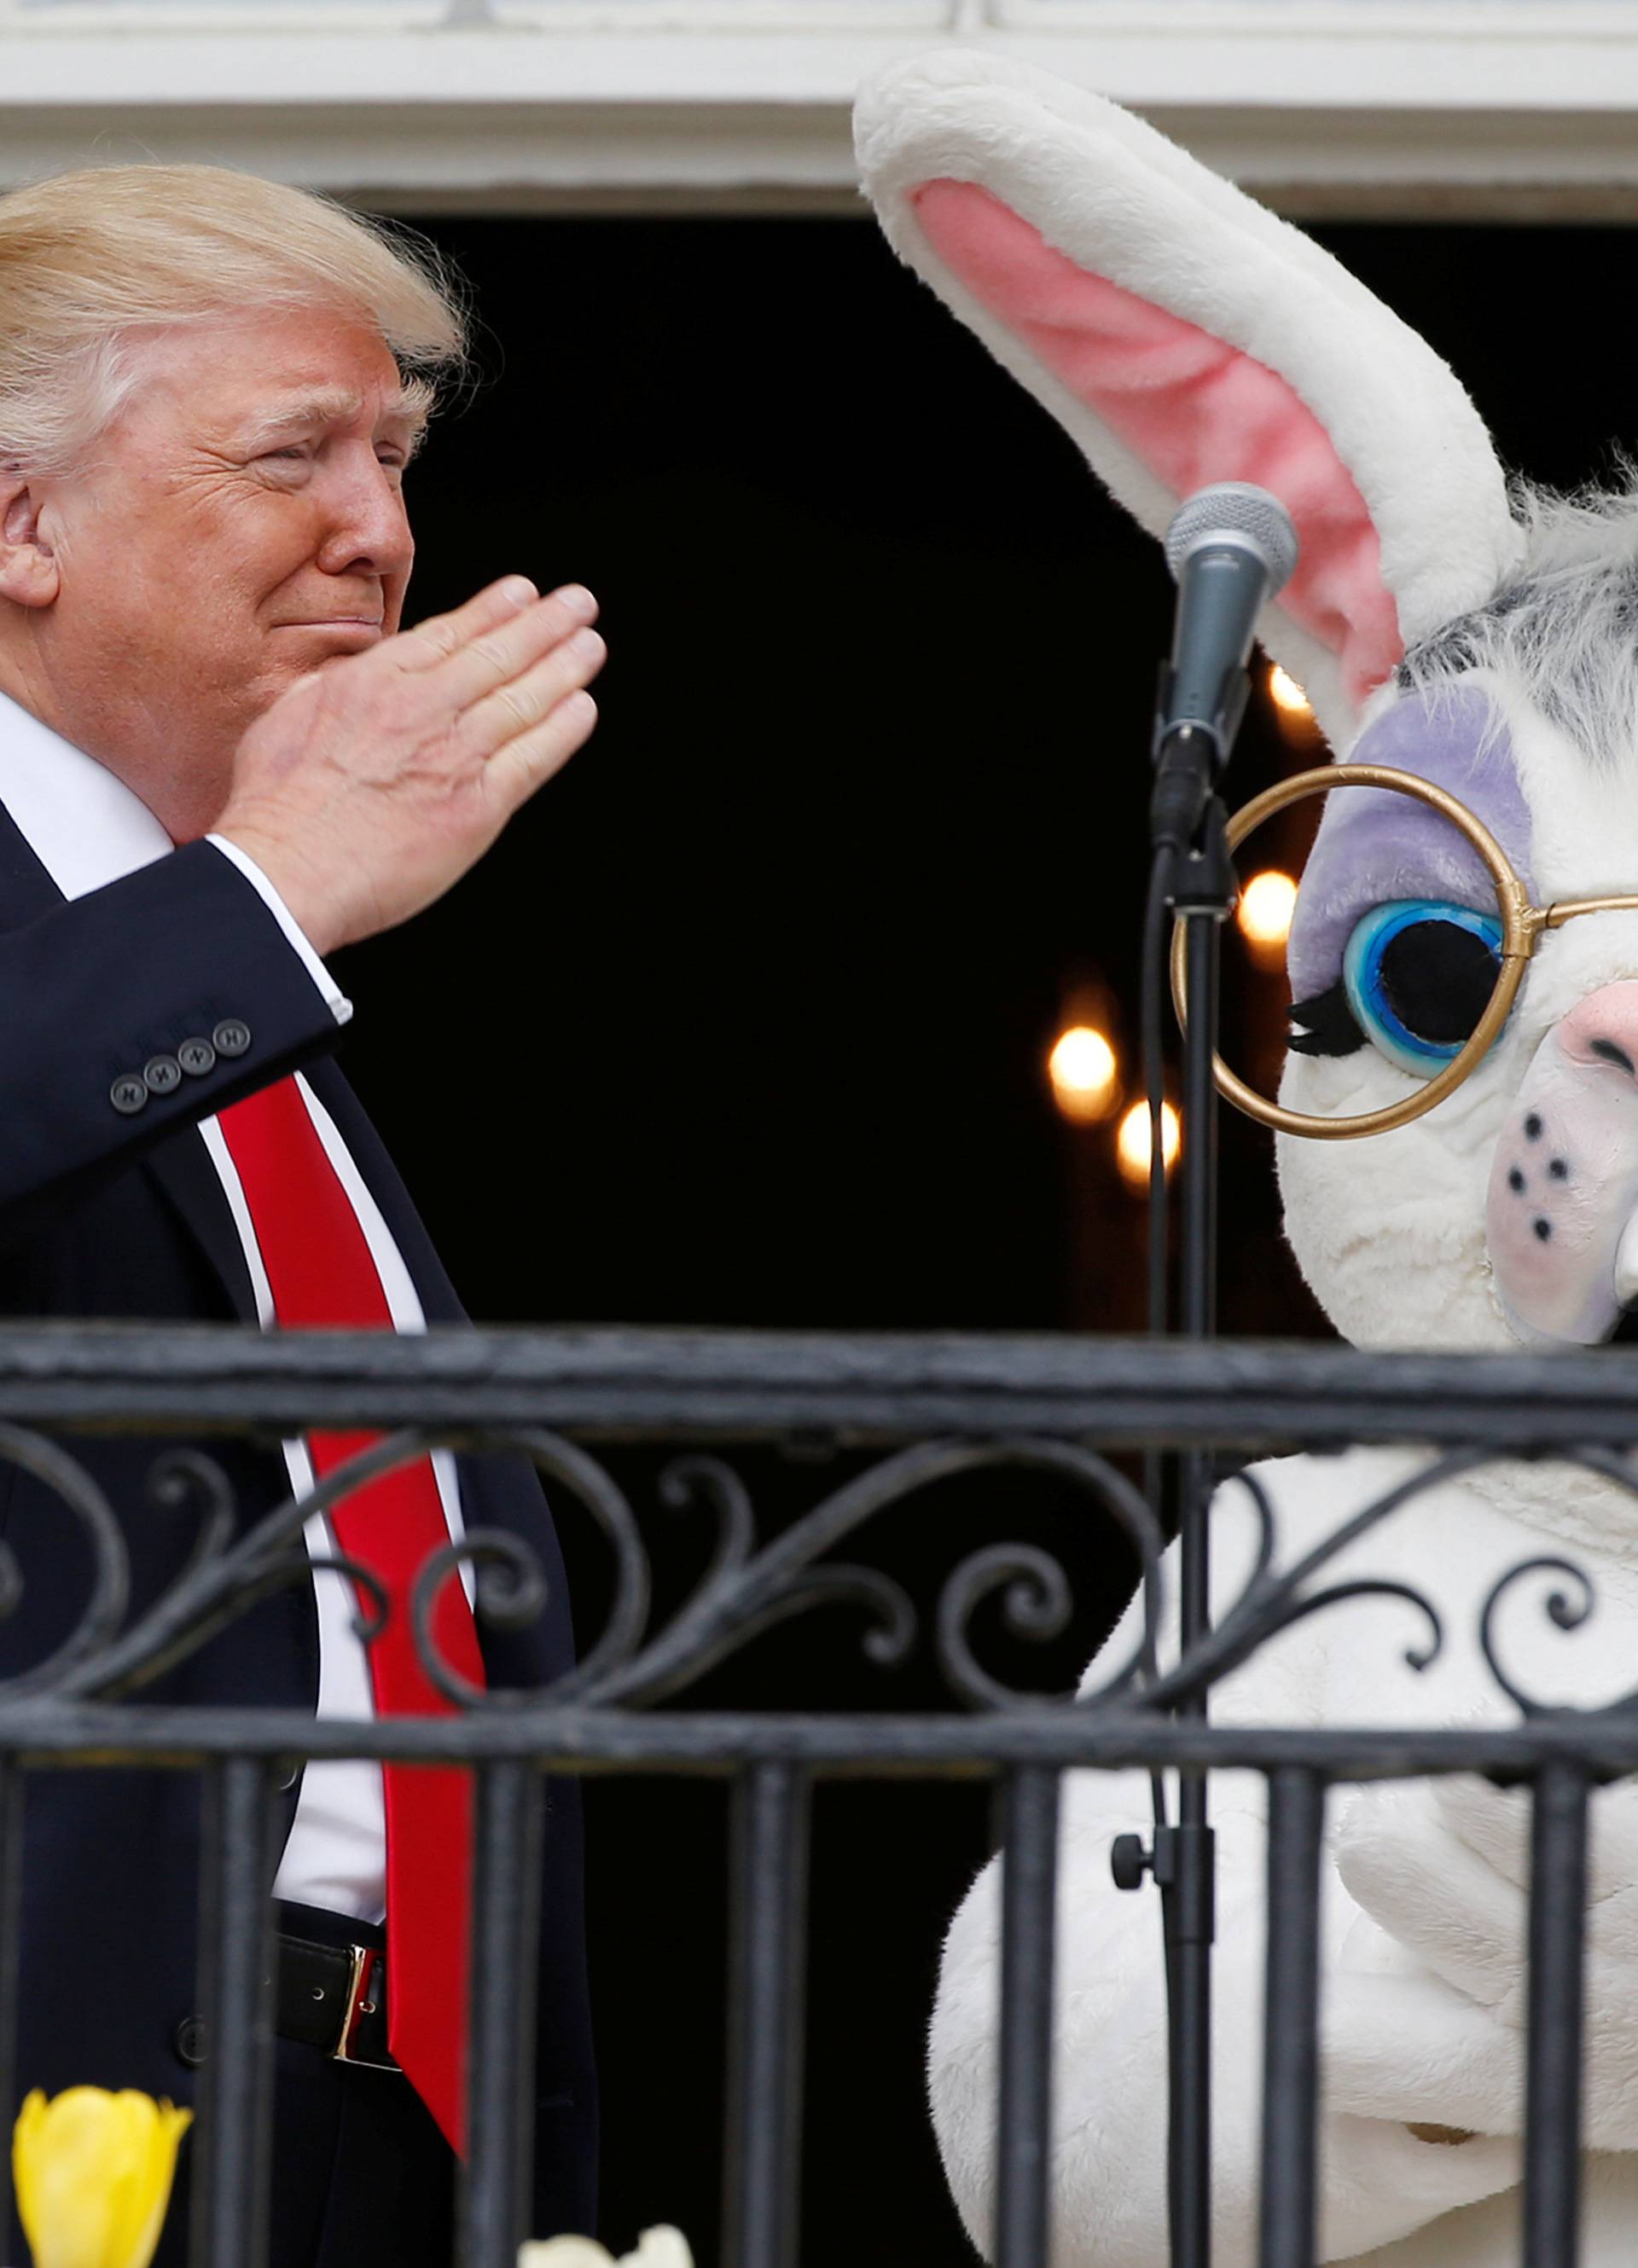 U.S. President Trump salutes a member of the military who had sung the national anthem as he stands with Easter Bunny character at White House Easter Egg Roll in Washington